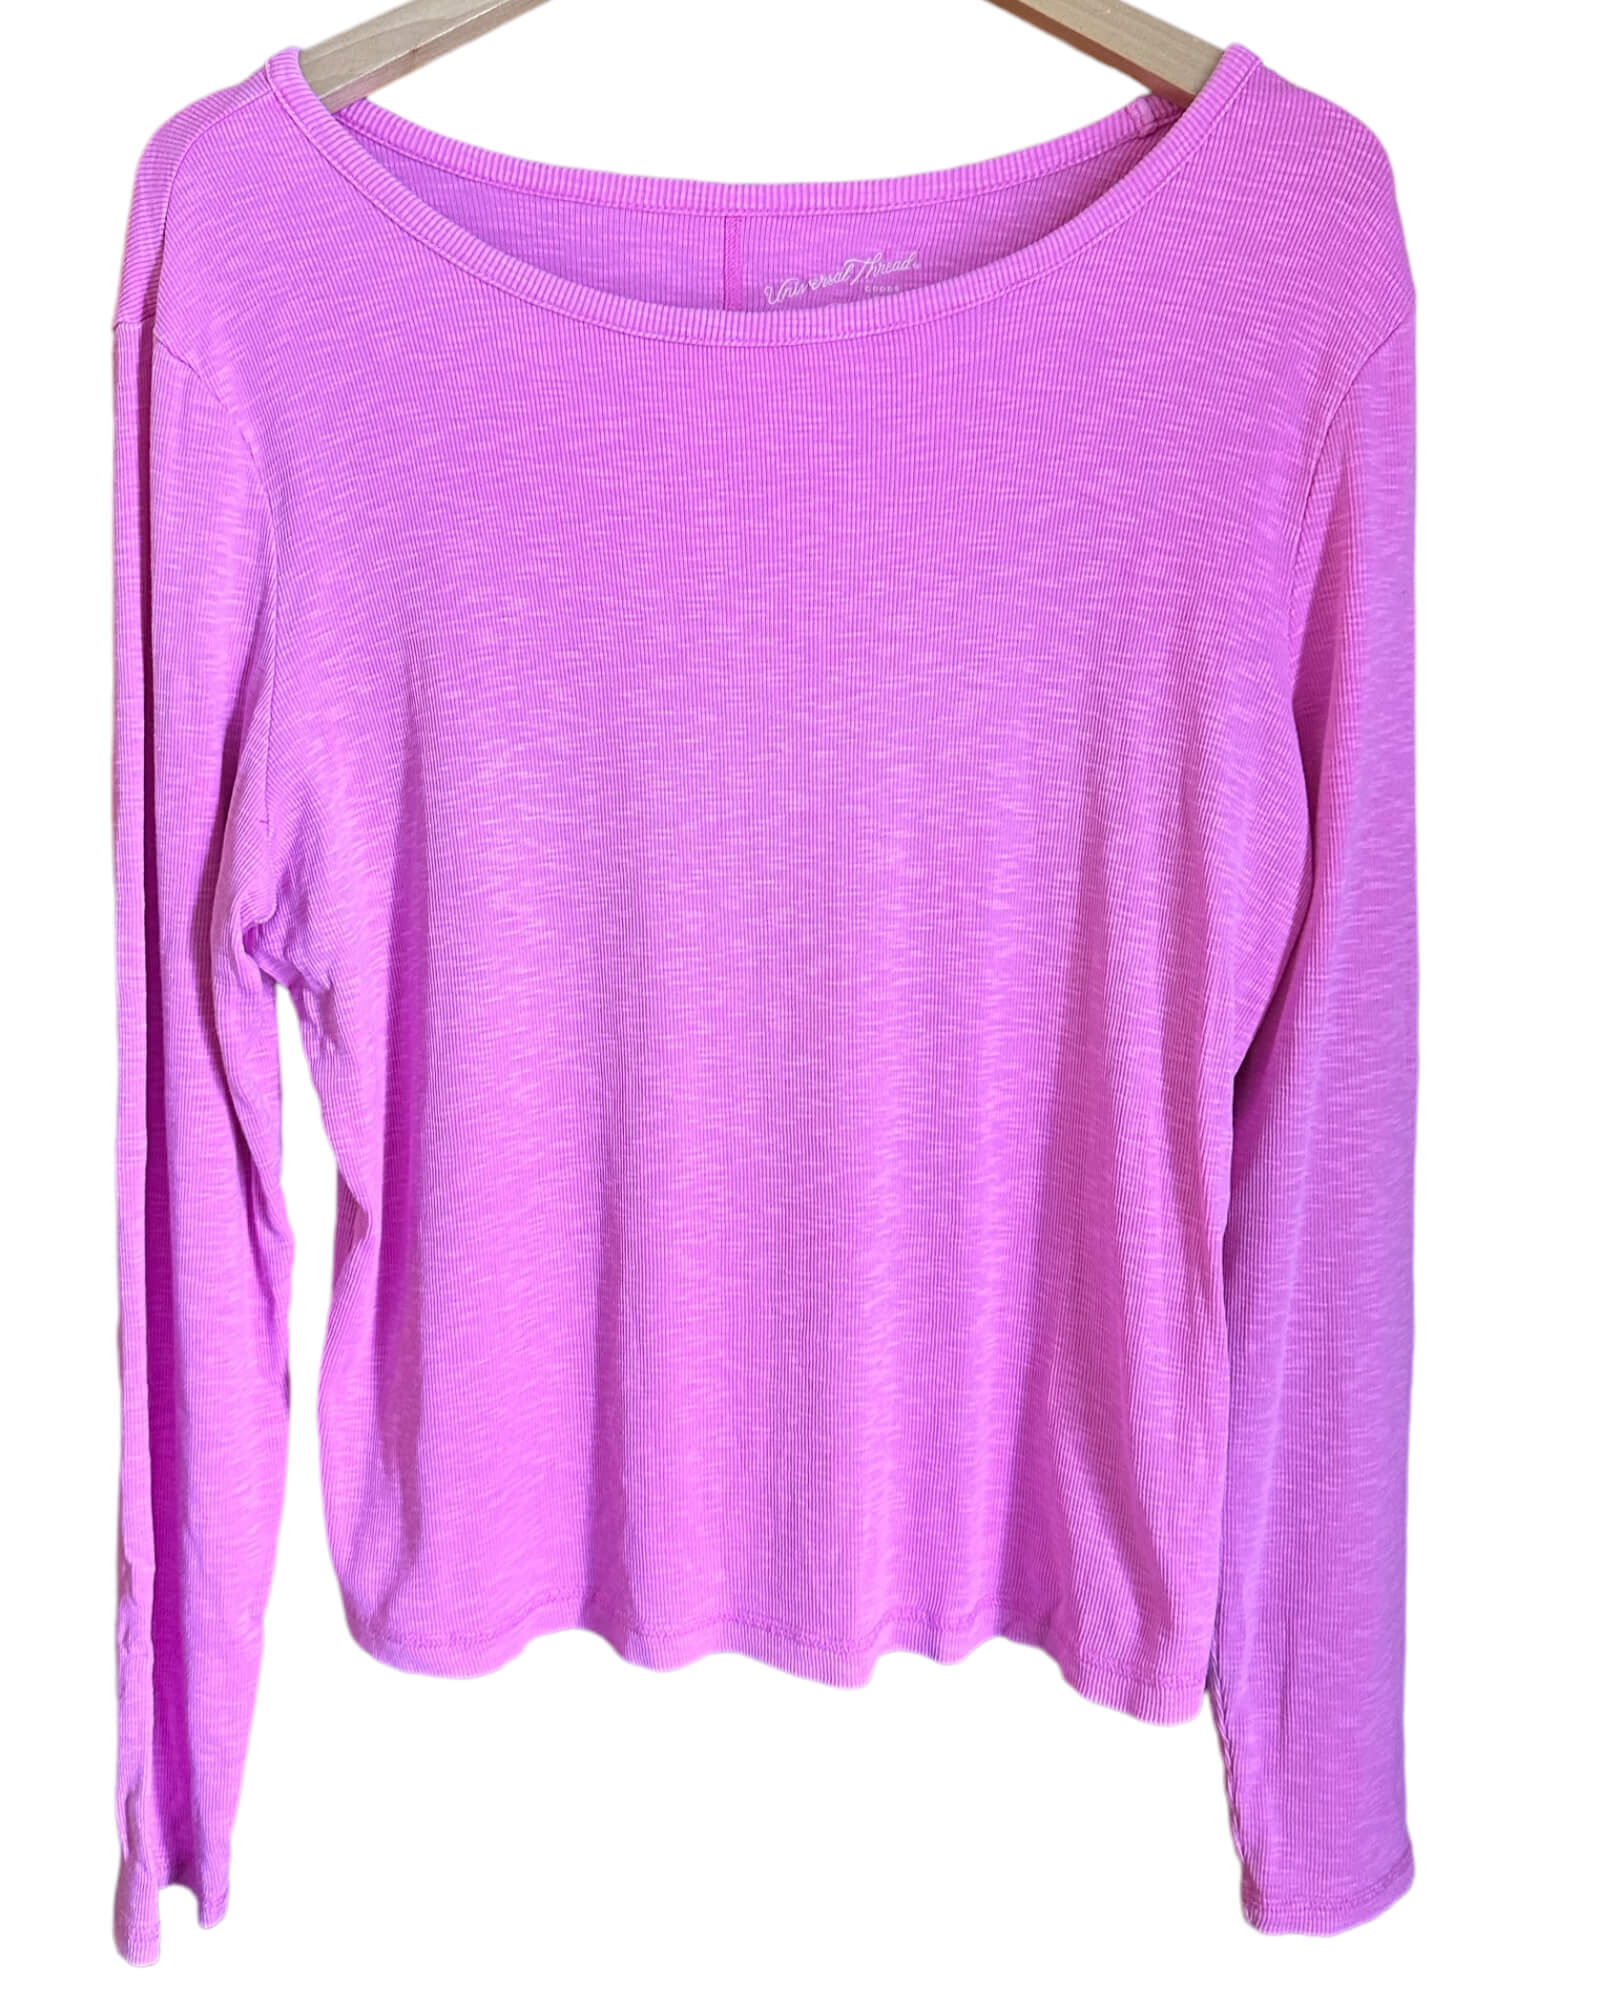 Cool Winter UNIVERSAL THREAD orchid pink open neck ribbed tee